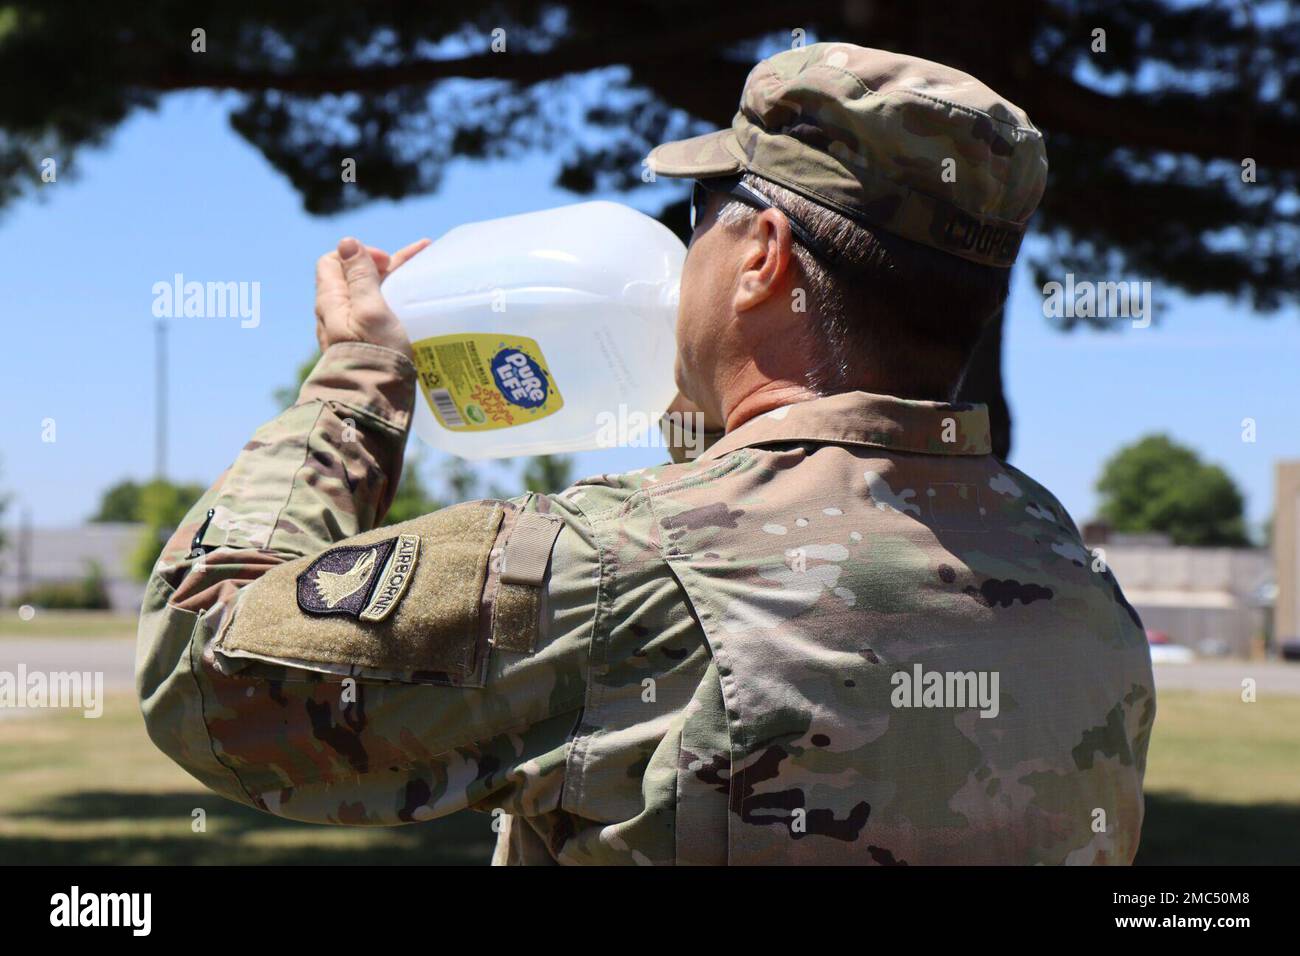 Sergeant First Class Jacab Cooper, 101st Airborne Division (Air Assault), drinks water to combat the heat June 24. Nita Hackwell preventative medicine and environmental health at Blanchfield Army Community Hospital, or BACH, said residents can avoid heat injury by knowing what to expect outside. “The heat line provides the wet bulb globe temperature, or WBGT, index and heat category to members of the Fort Campbell community training, working, and playing outdoors in direct sunlight,” she said. “Monitoring the WBGT index is an important step in determining when modifications to outdoor physical Stock Photo